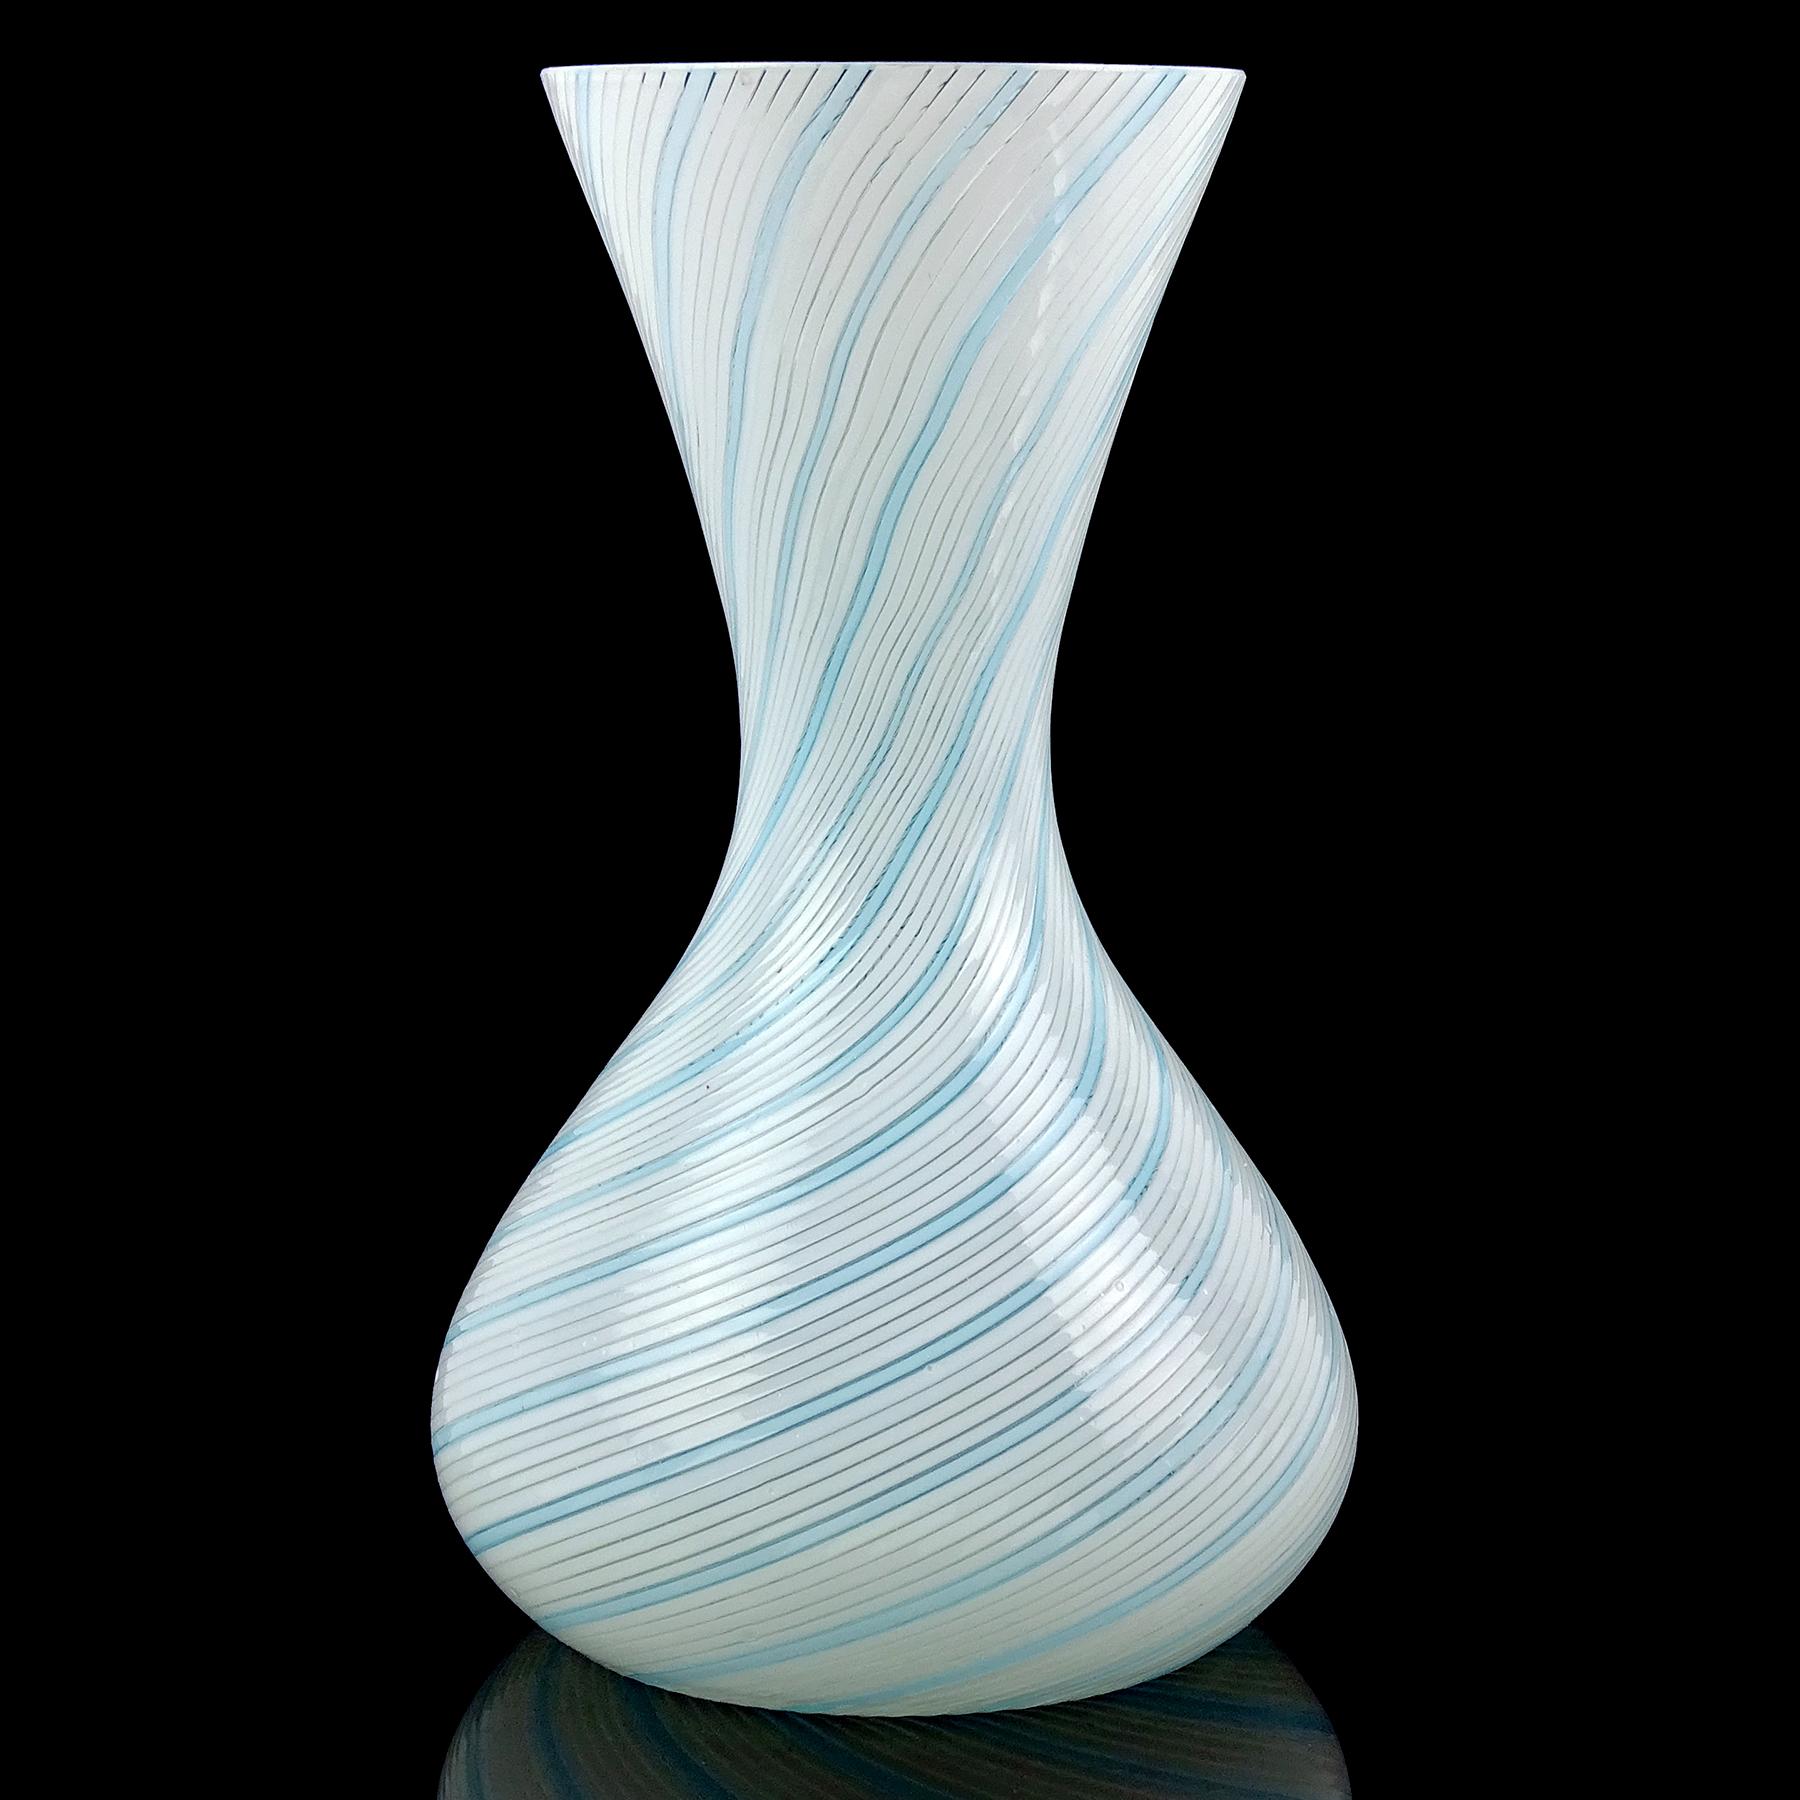 Beautiful vintage Murano hand blown white and blue ribbons Italian art glass flower vase. Documented to designer Dino Martens for Aureliano Toso. The vase is created in the “Mezza Filigrana” technique, with 5 rows of white and 1 row of sky blue